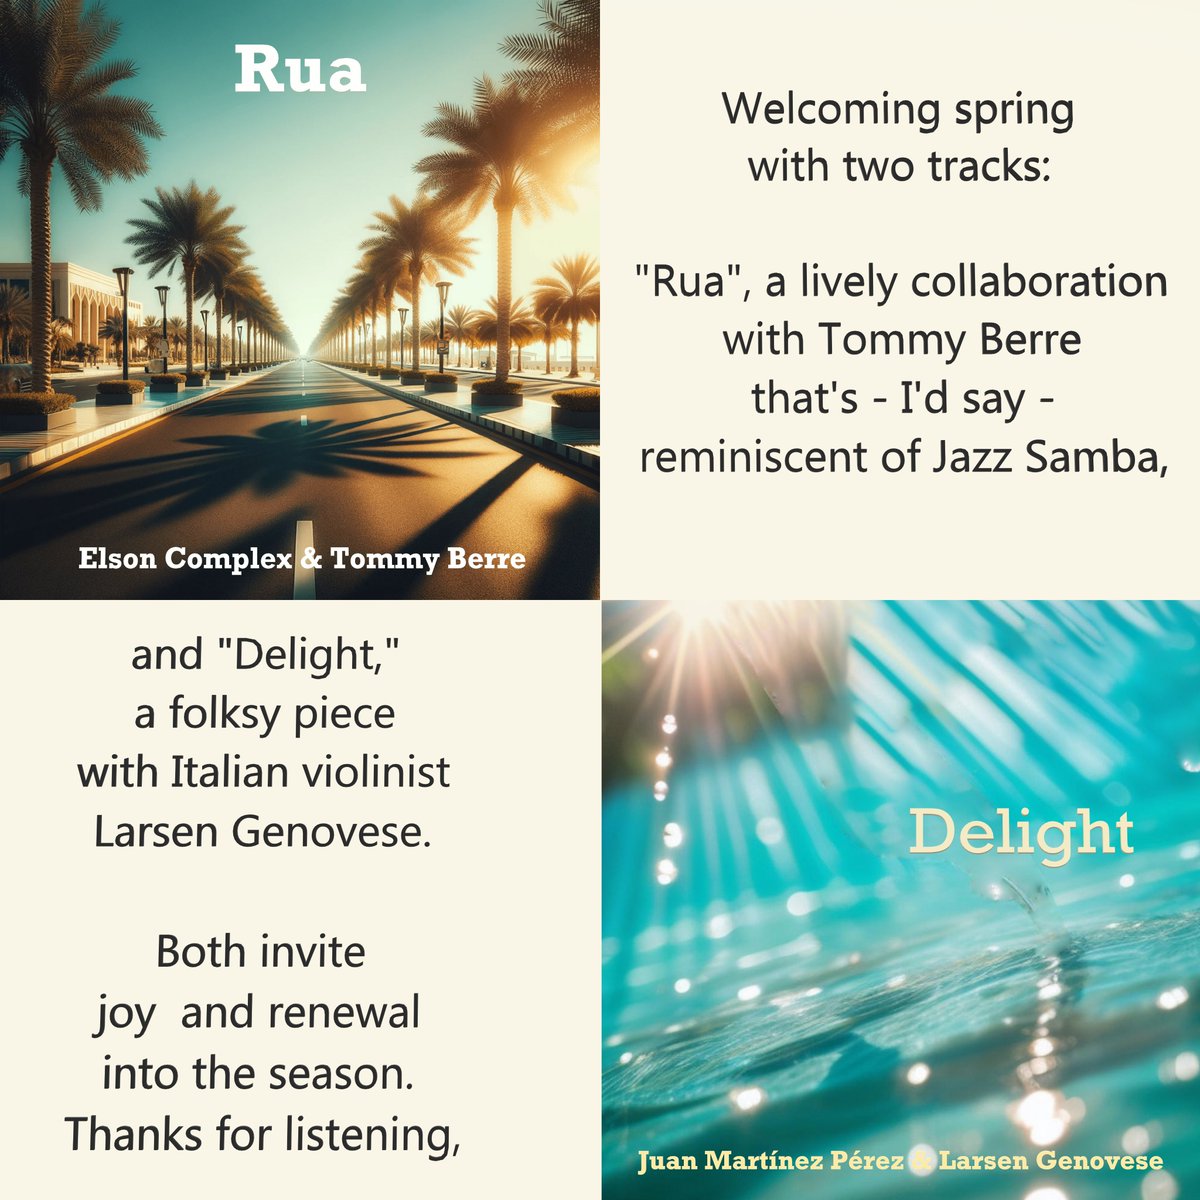 Dear all, welcoming spring with two tracks: 'Rua', a lively collaboration with Tommy Berre that's - I'd say - reminiscent of Jazz Samba, and 'Delight,' a folksy piece with Italian violinist Larsen Genovese. Link to mini-playlist containing both tracks: open.spotify.com/playlist/2KI9y…